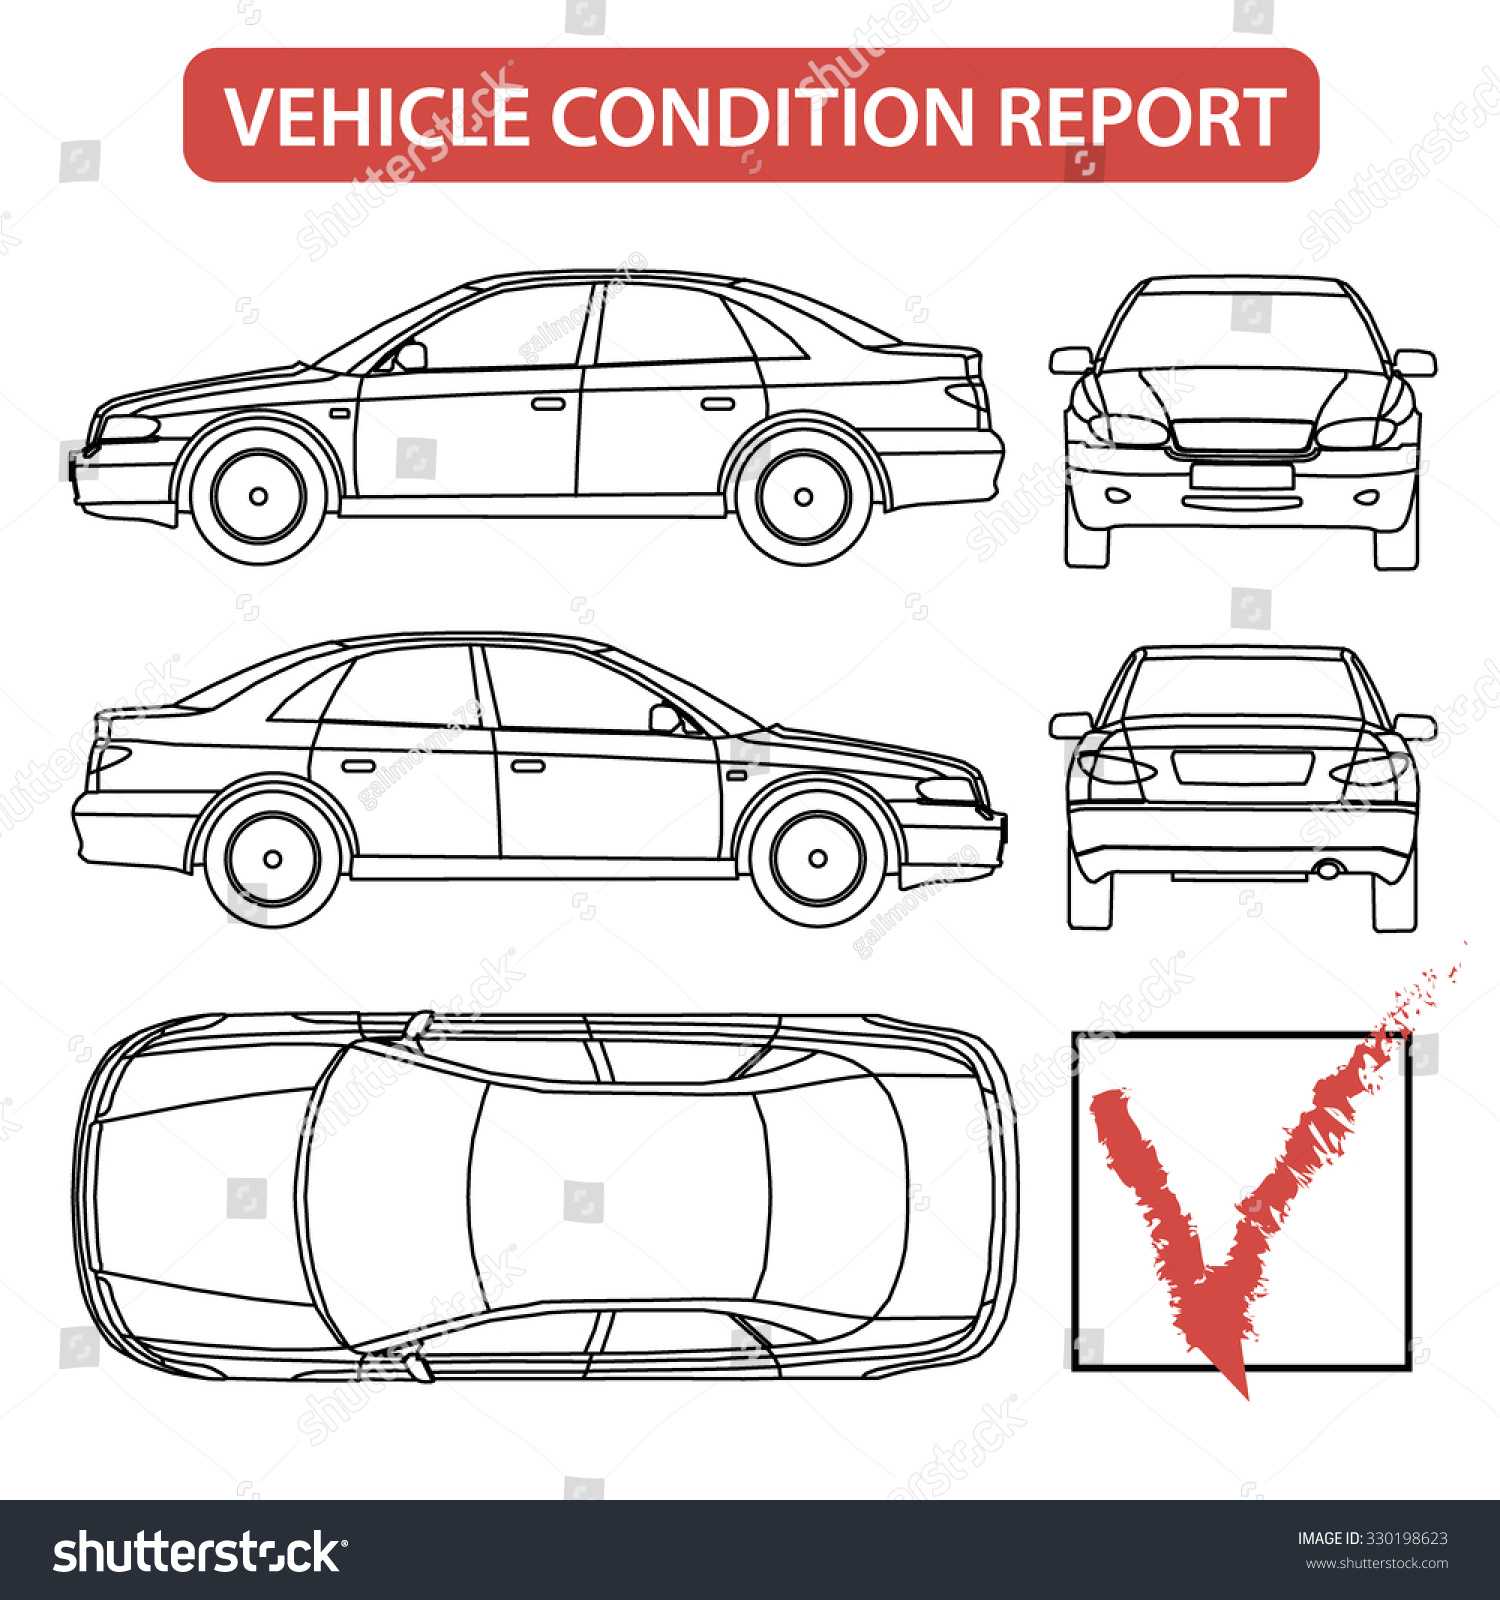 Car Condition Form Vehicle Checklist Auto Stock Vector Throughout Car Damage Report Template